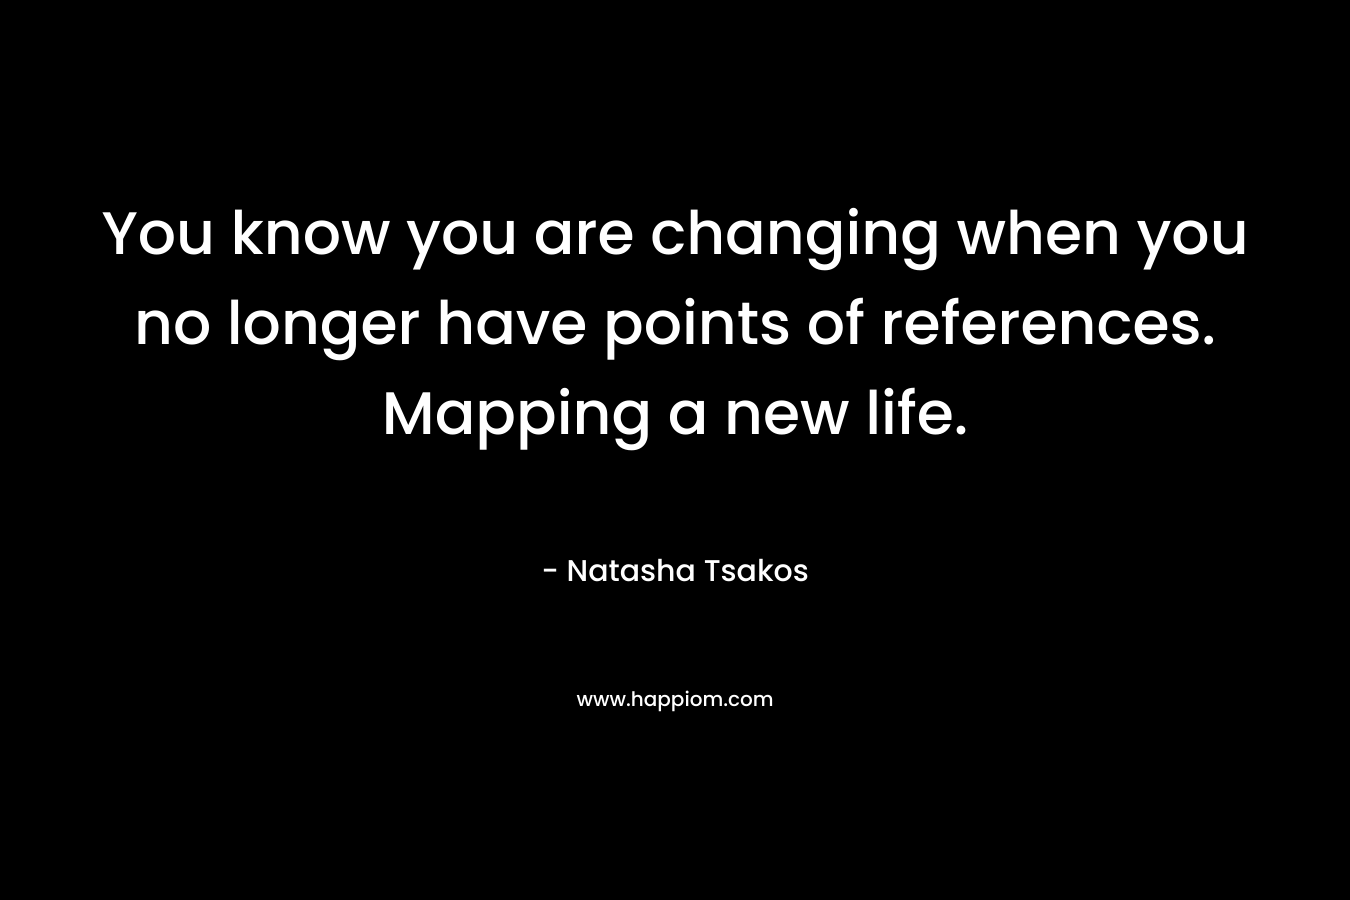 You know you are changing when you no longer have points of references. Mapping a new life. – Natasha Tsakos